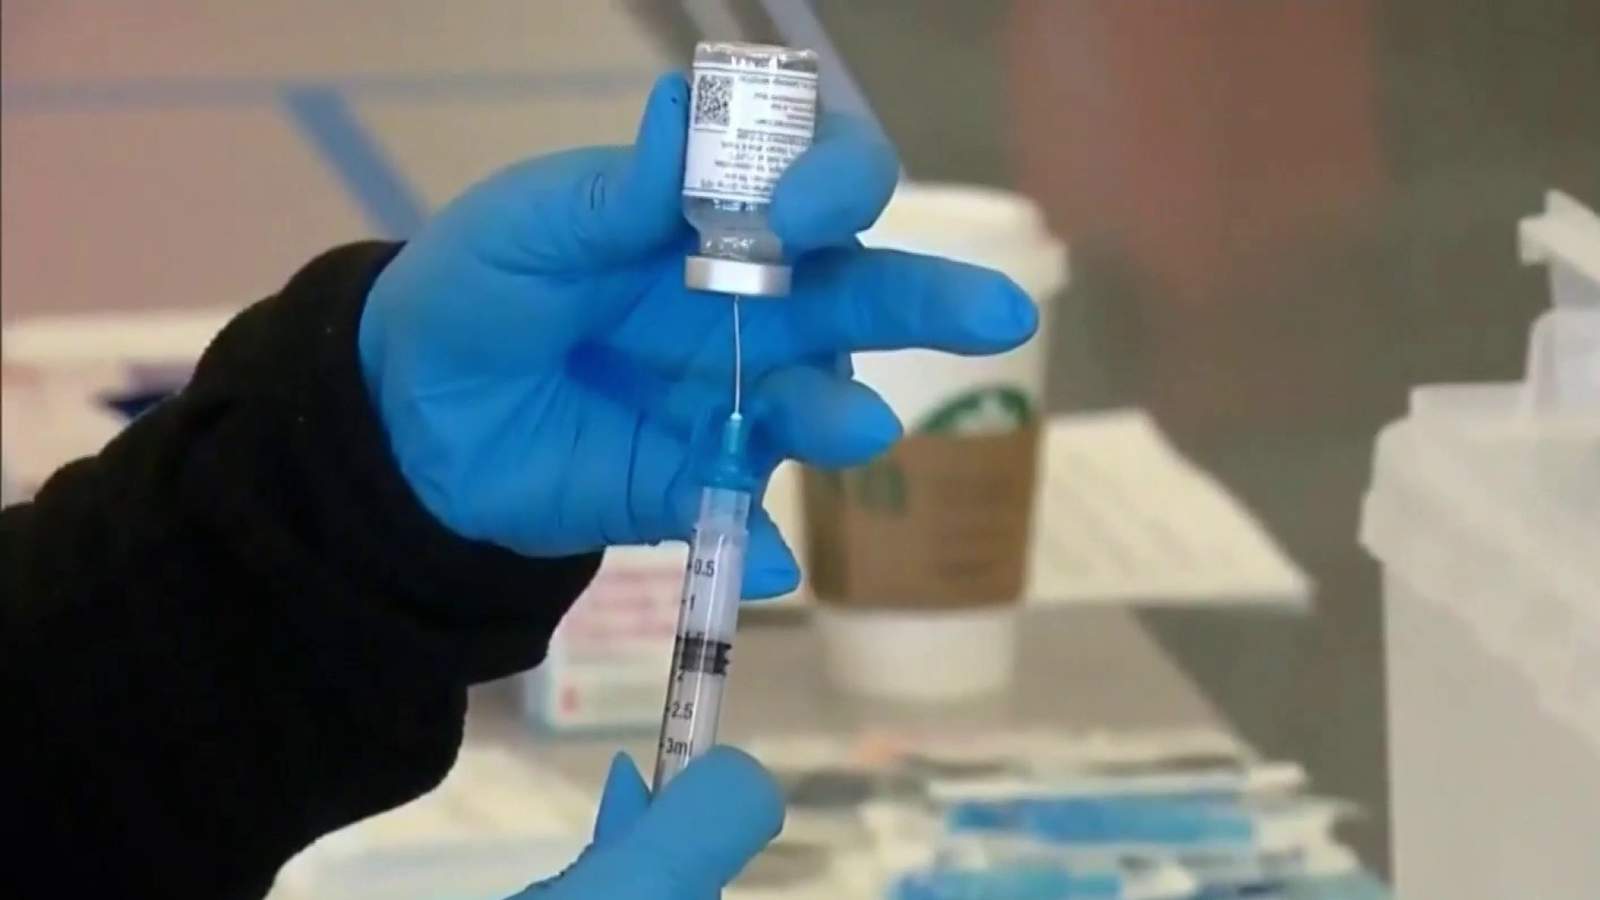 Confusion over ‘extremely vulnerable’ eligibility for COVID-19 vaccine